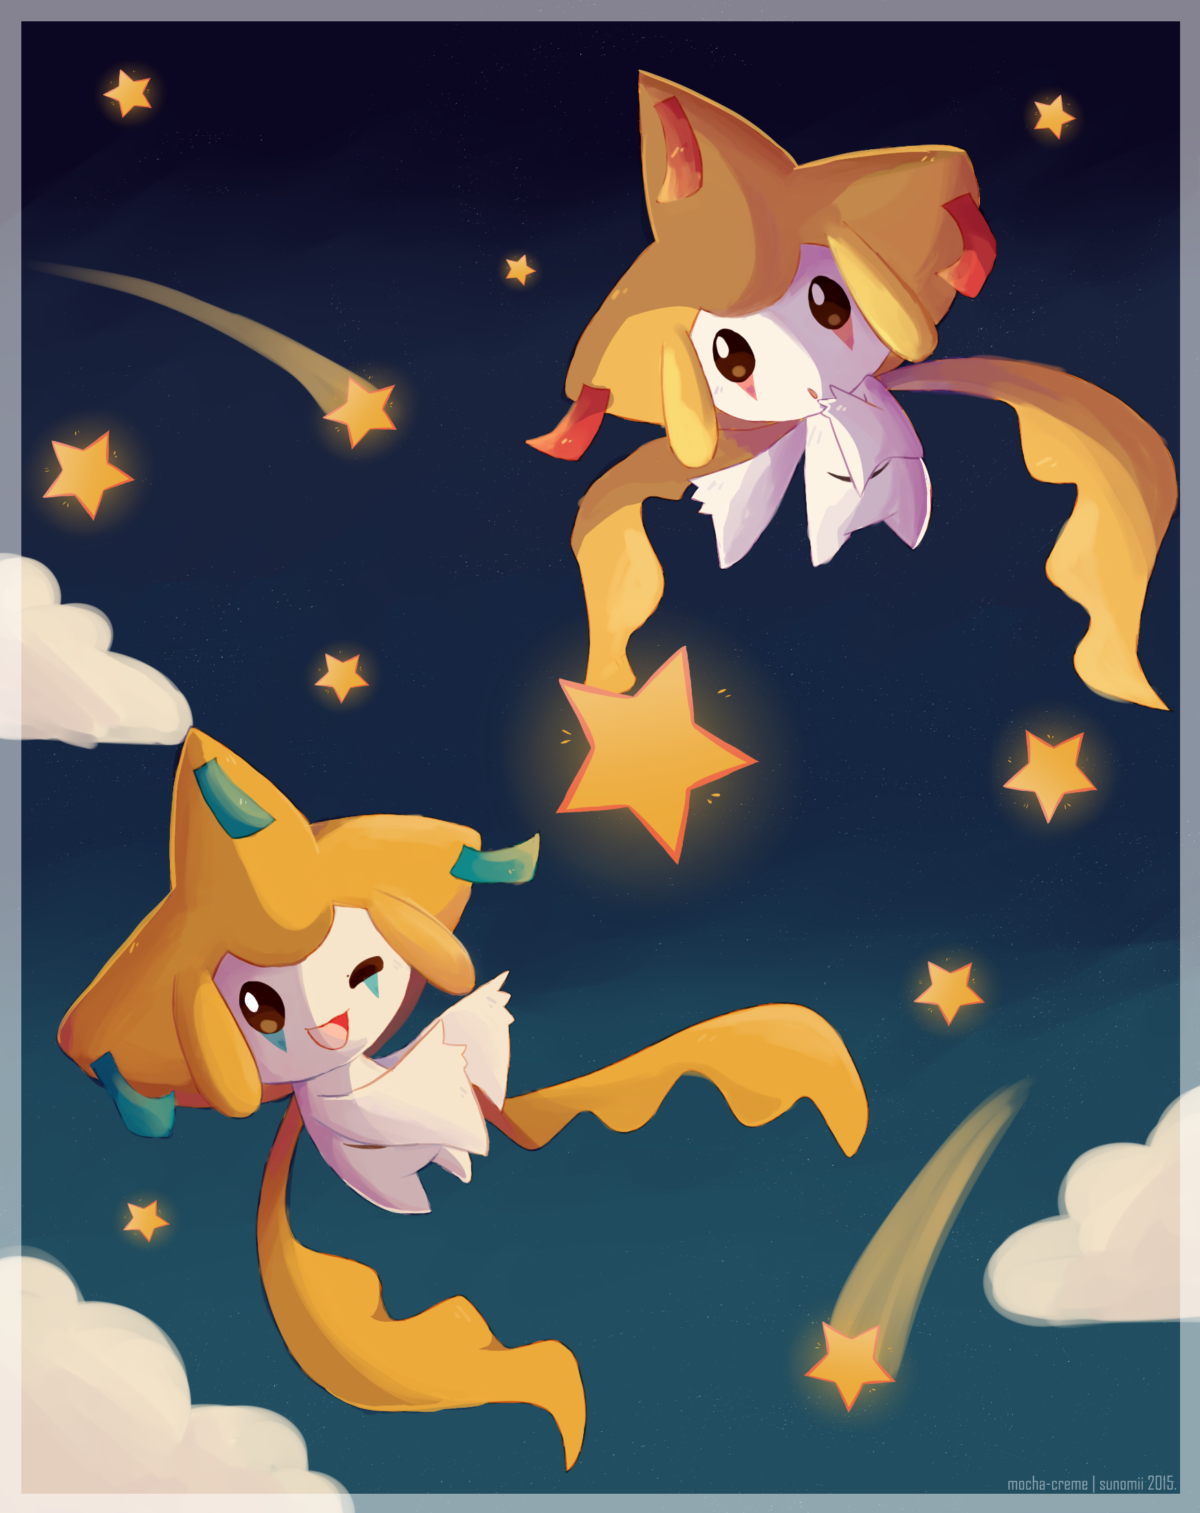 Jirachi HD Wallpapers 20+ – Page 3 of 3 – ondss.com